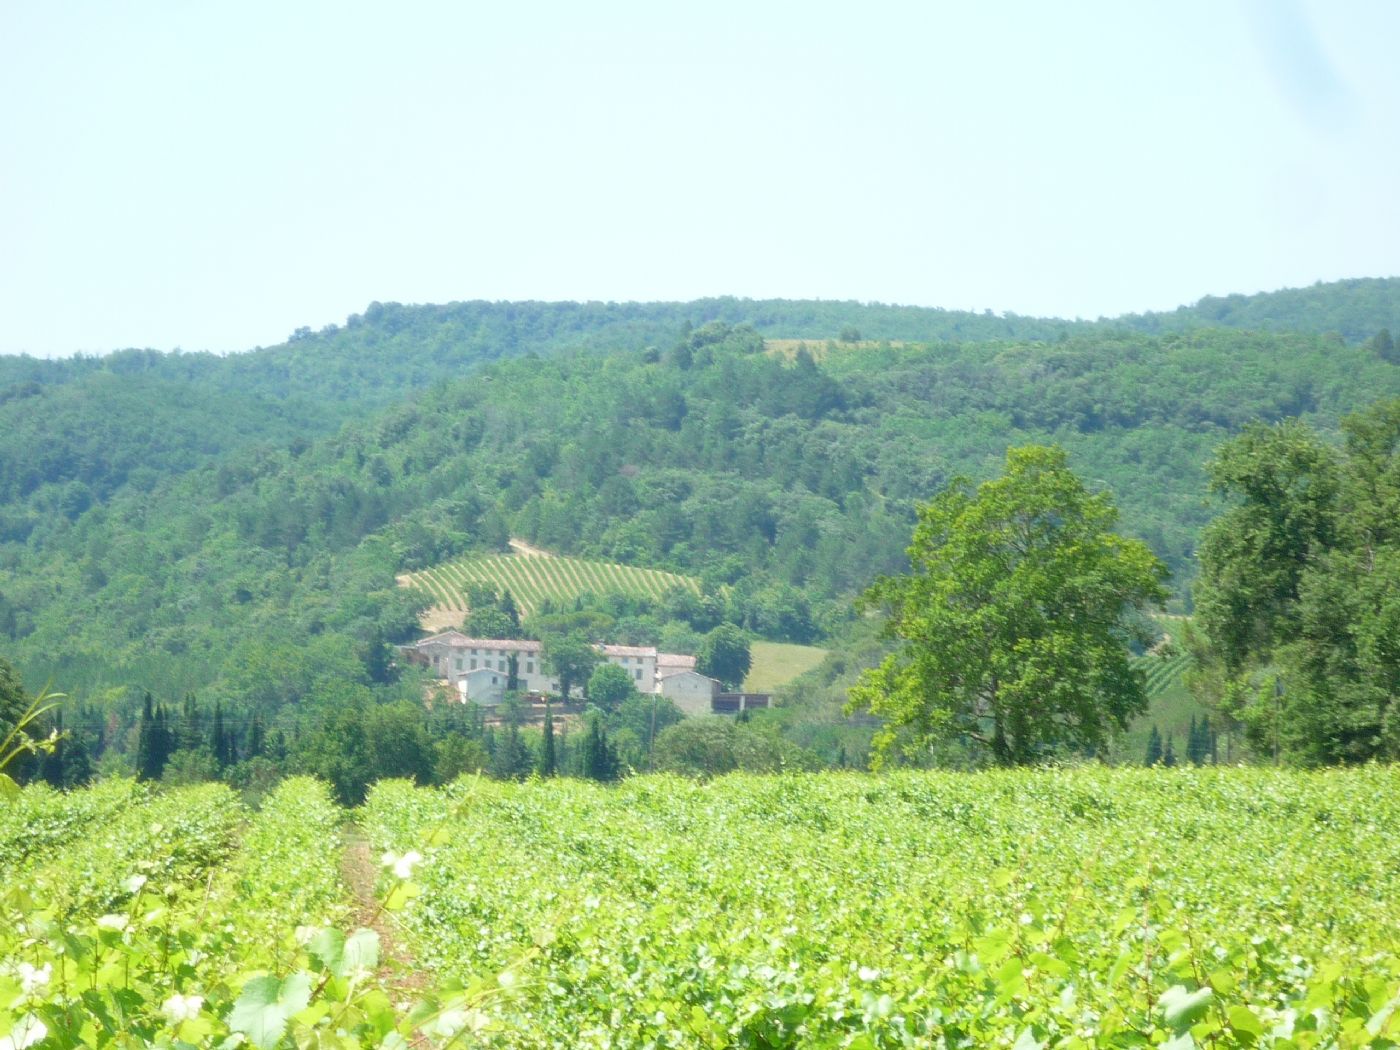 The estate is located in the heart of the vineyard